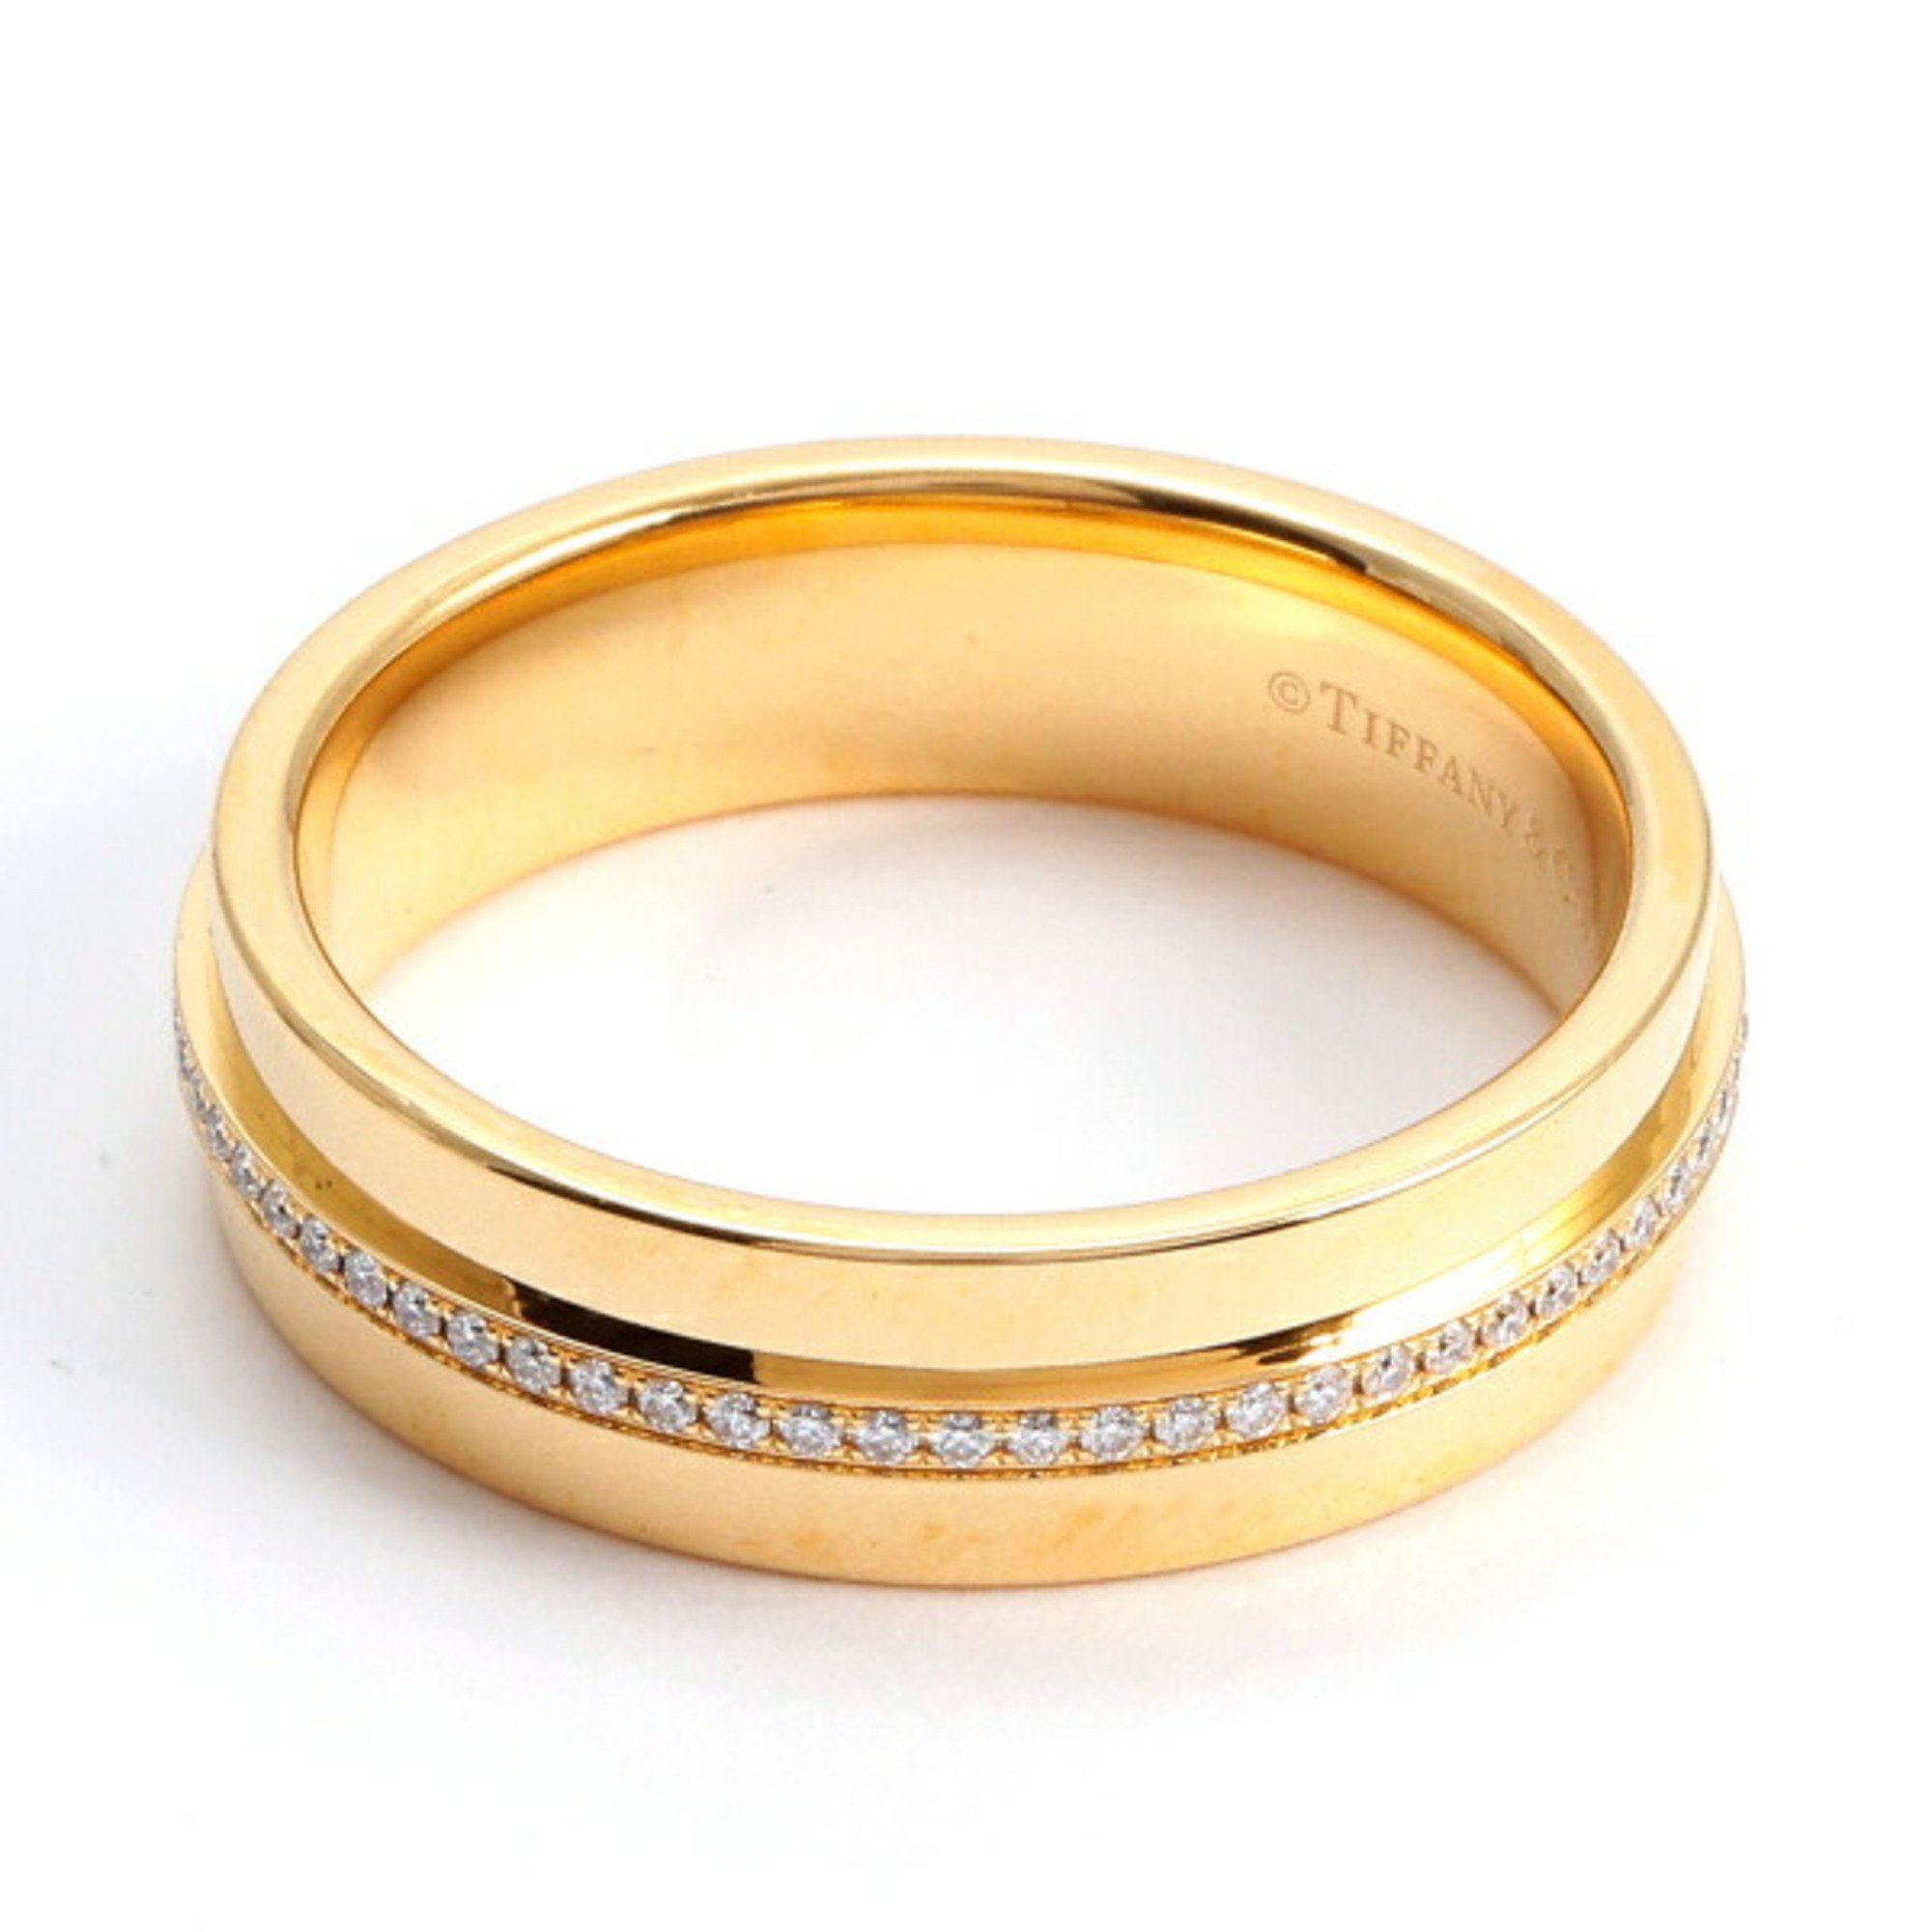 Tiffany T Wide Diamond Ring in 18K Yellow Gold